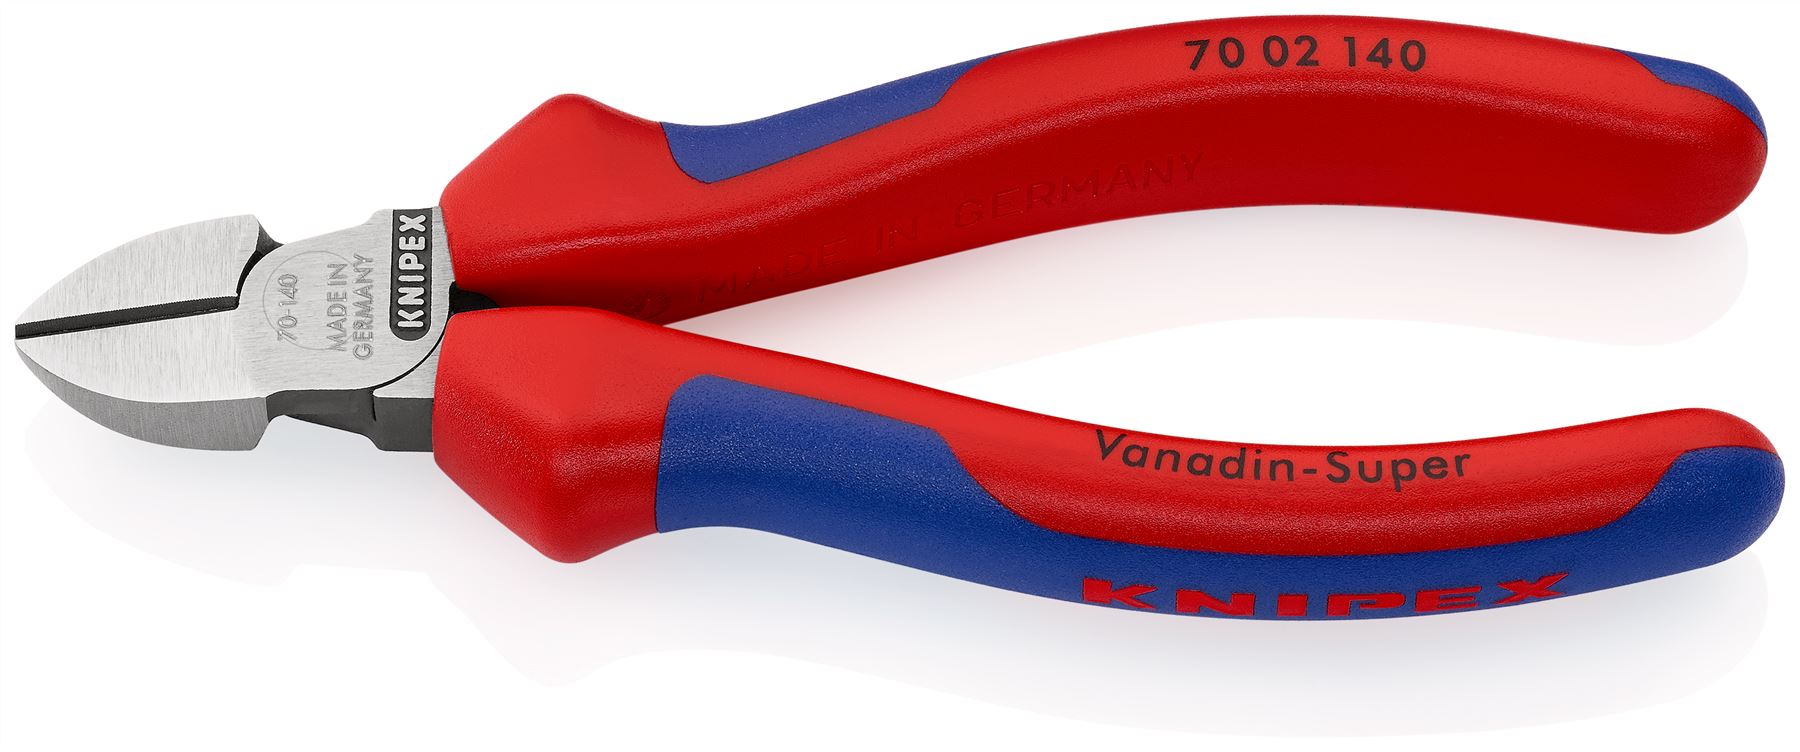 Knipex Diagonal Side Cutting Pliers 140mm Multi Component Grips 70 02 140